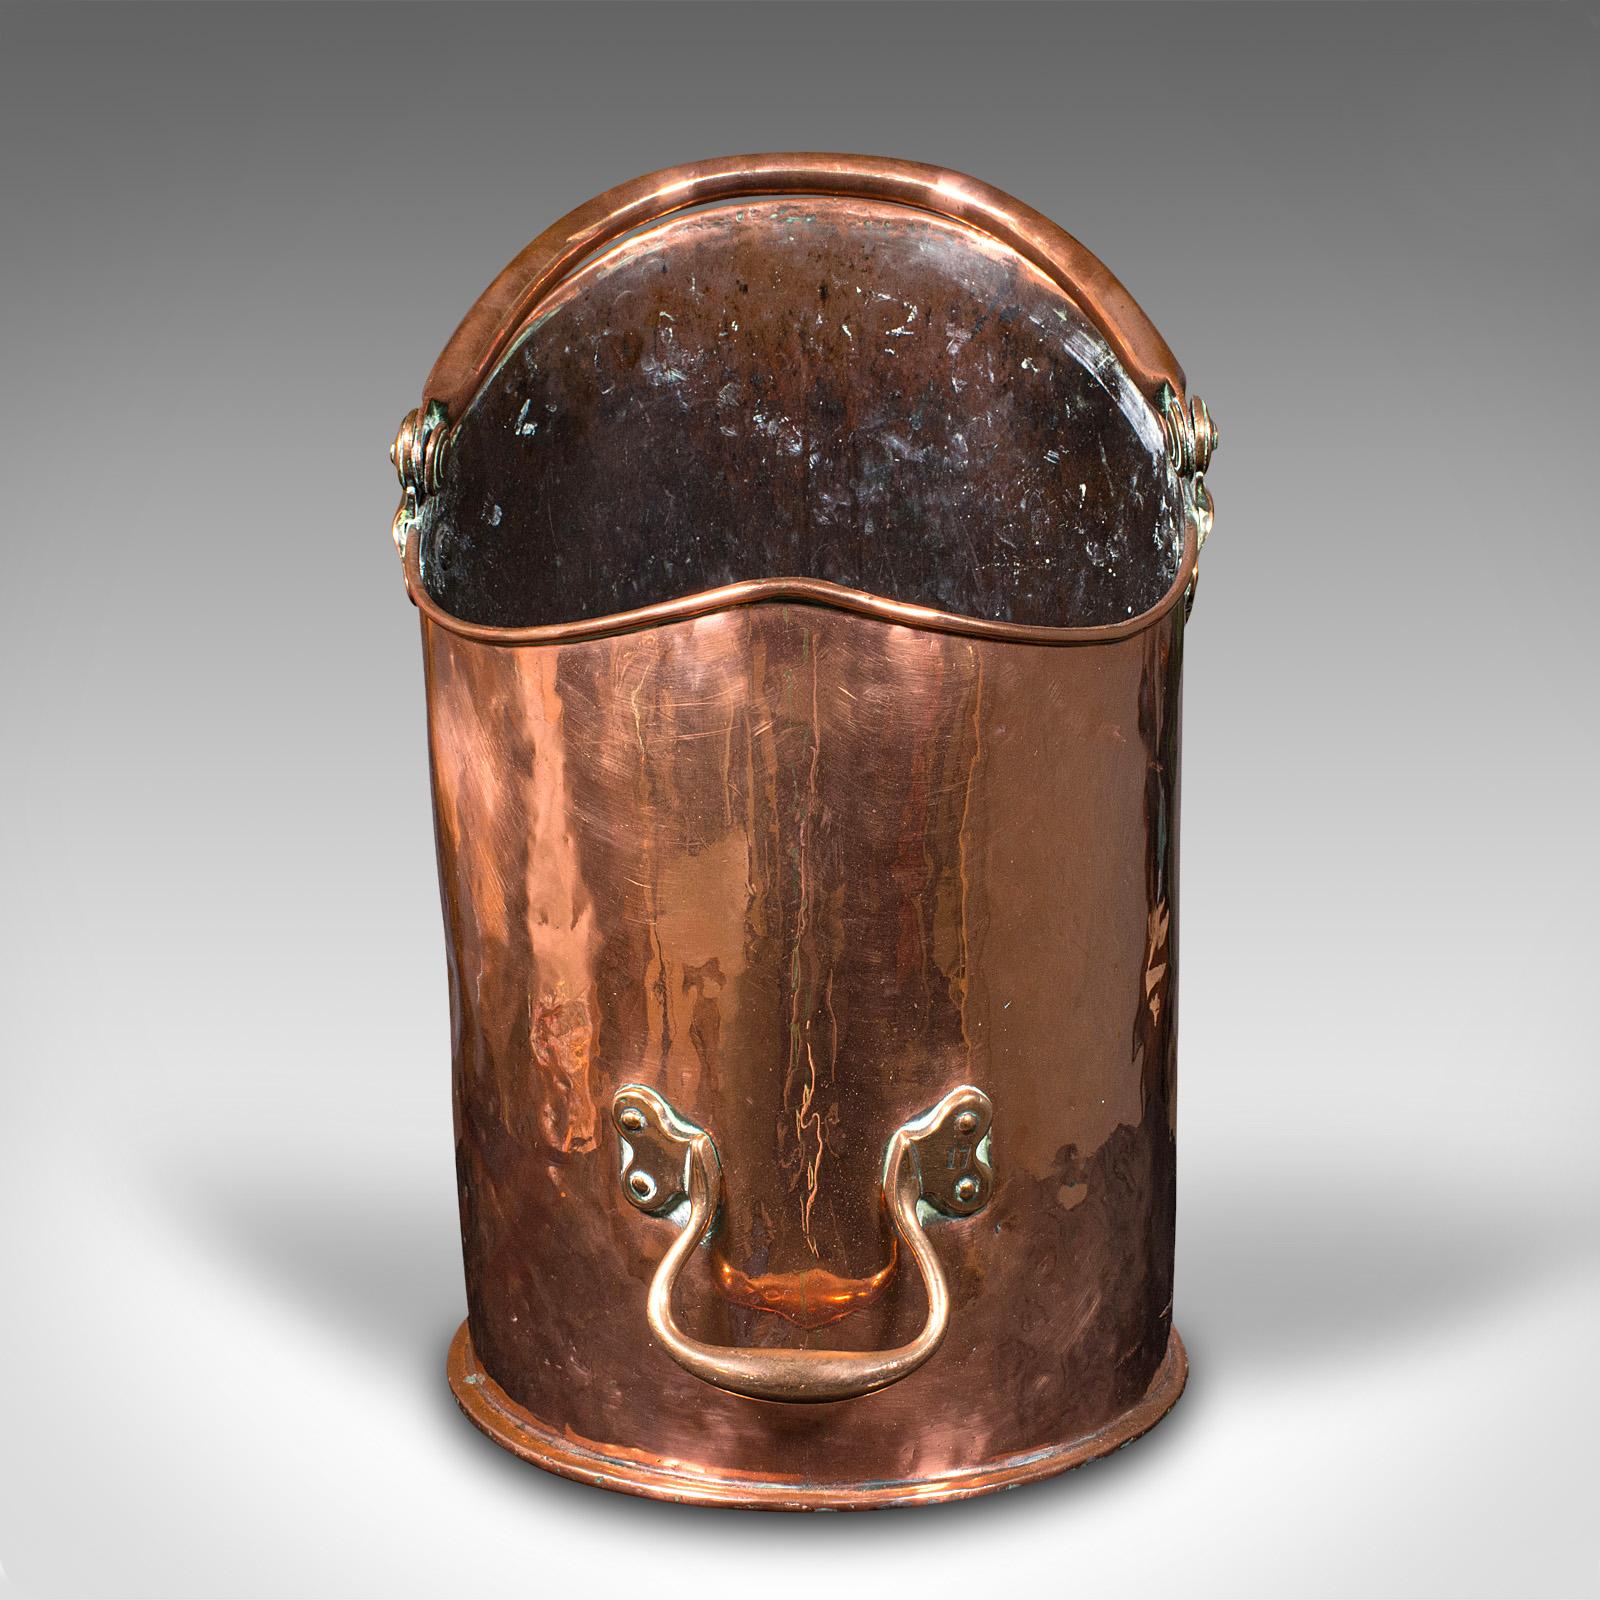 This is a large antique country house coal bin. An English, copper fireside fuel keeper, dating to the early Victorian period, circa 1850.

Appealing proportion, with generous storage to attend to the needs of the larger fire
Displays a desirable